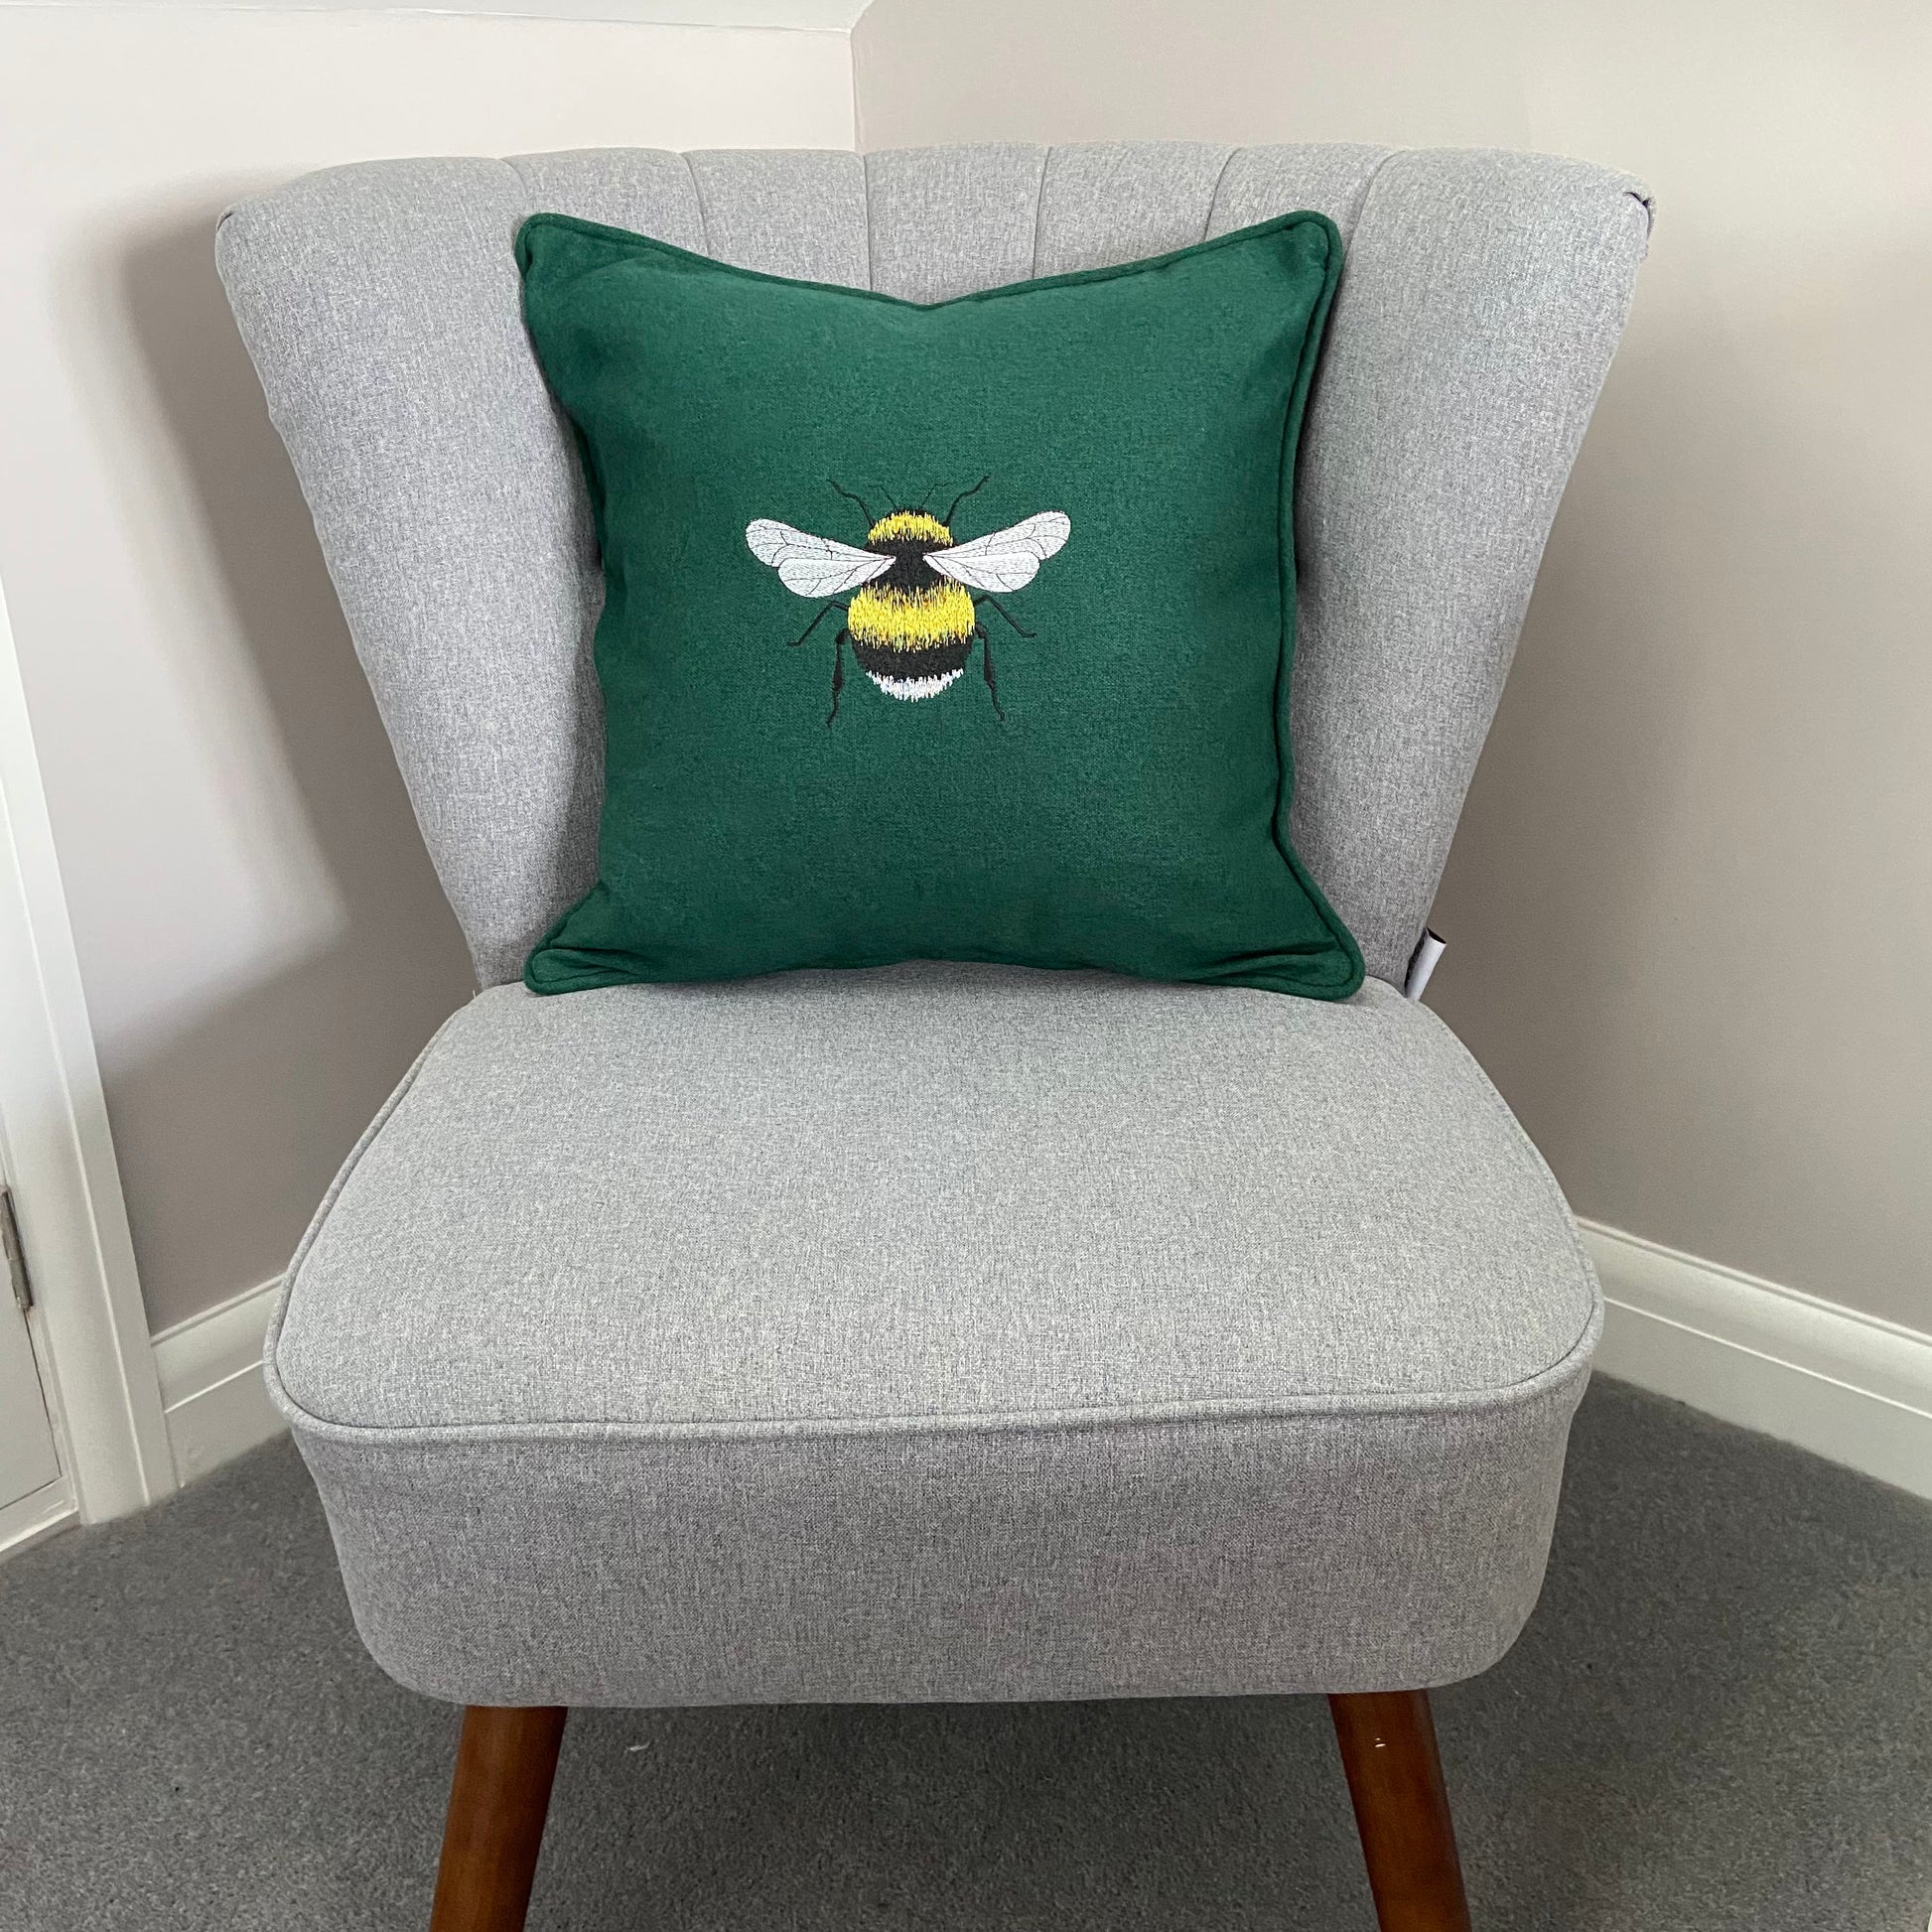 Bee Embroidered Cushion Cover